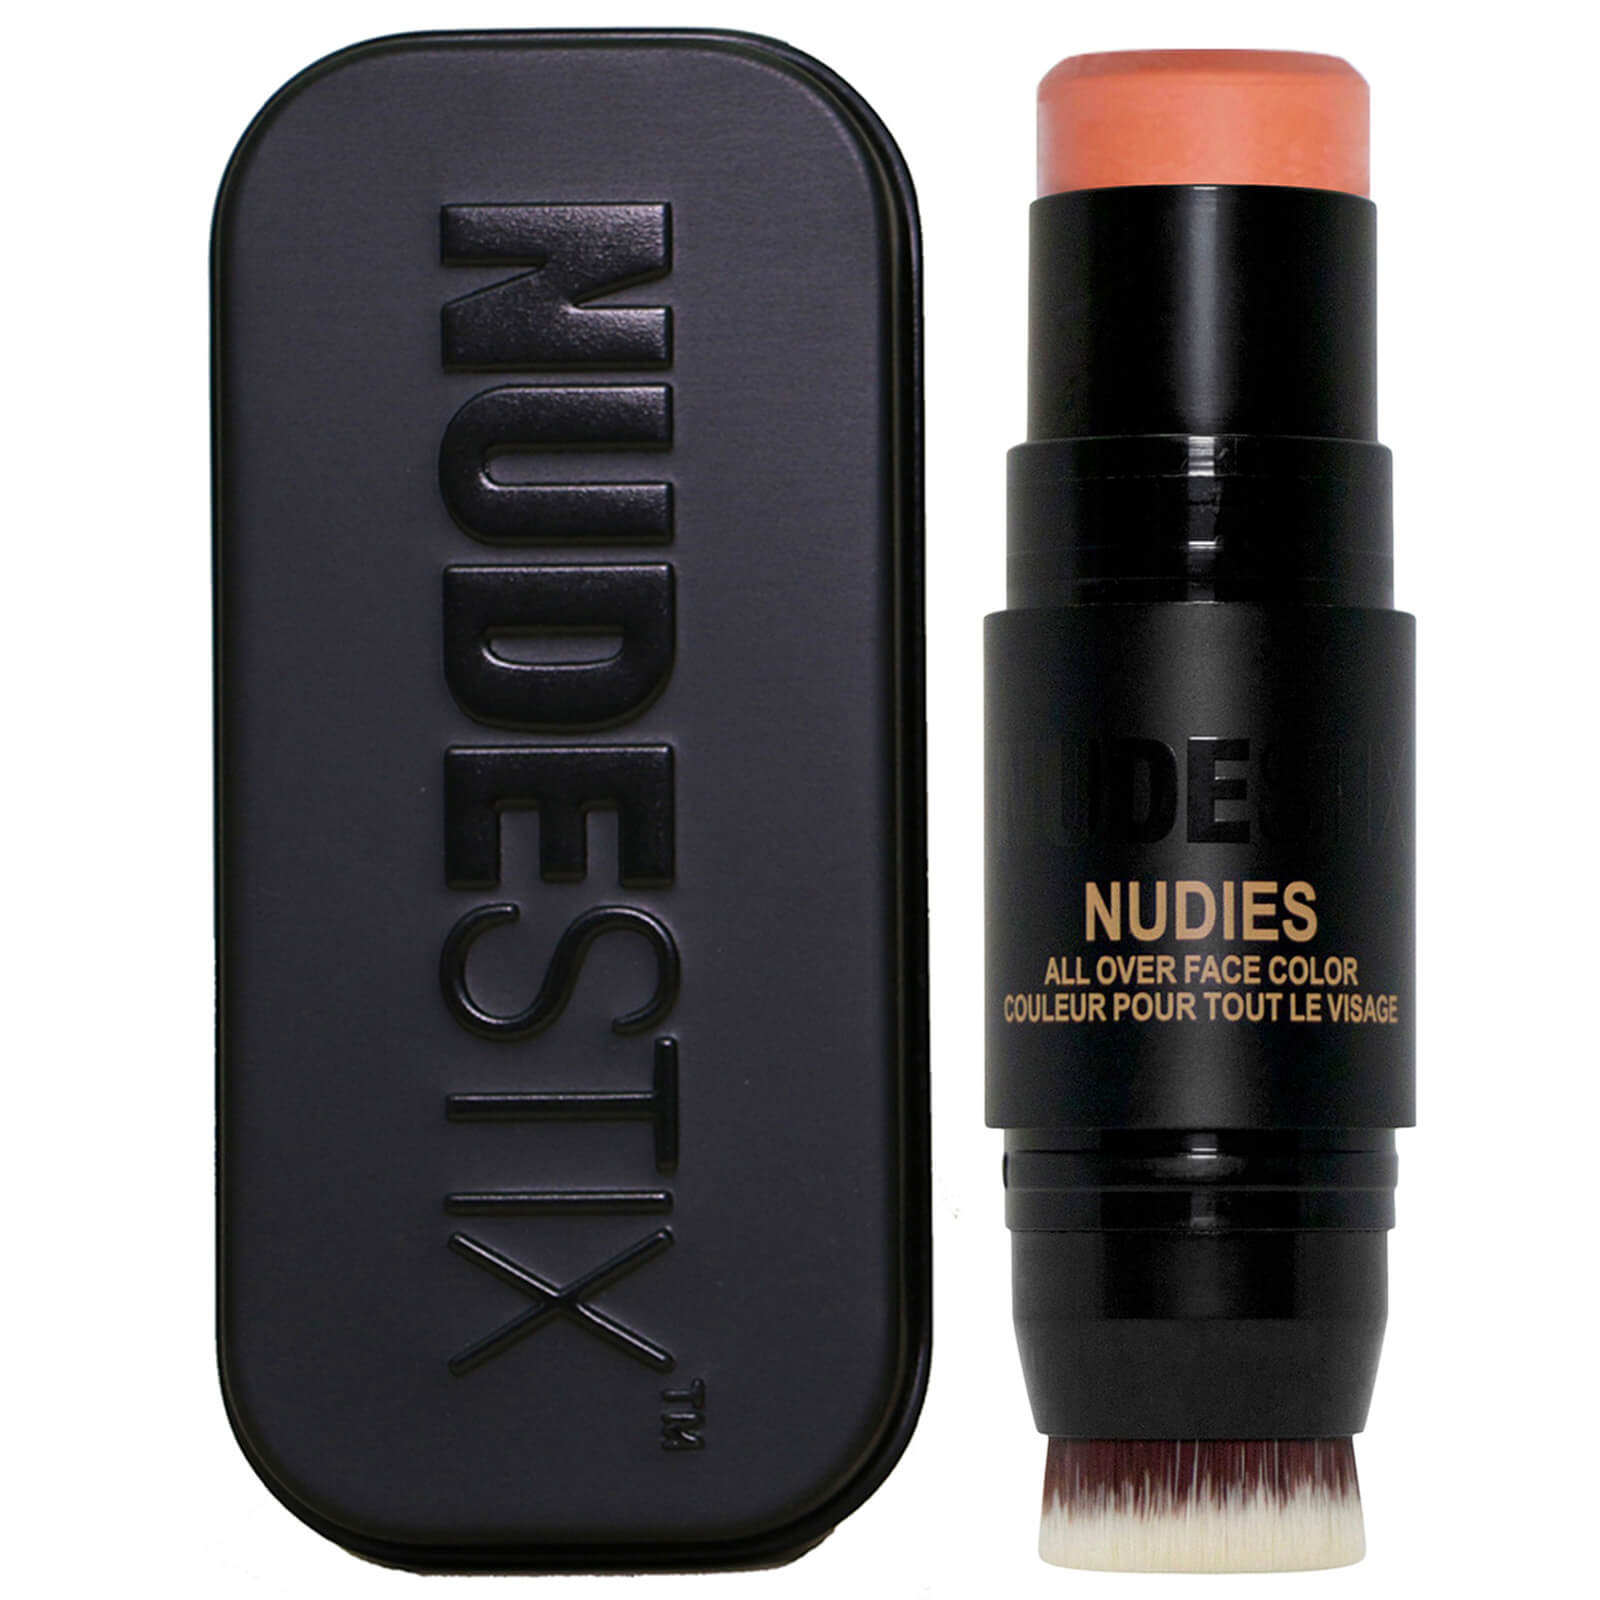 Nudestix Nudies All Over Face Color Matte 7g (various Shades) In Orange